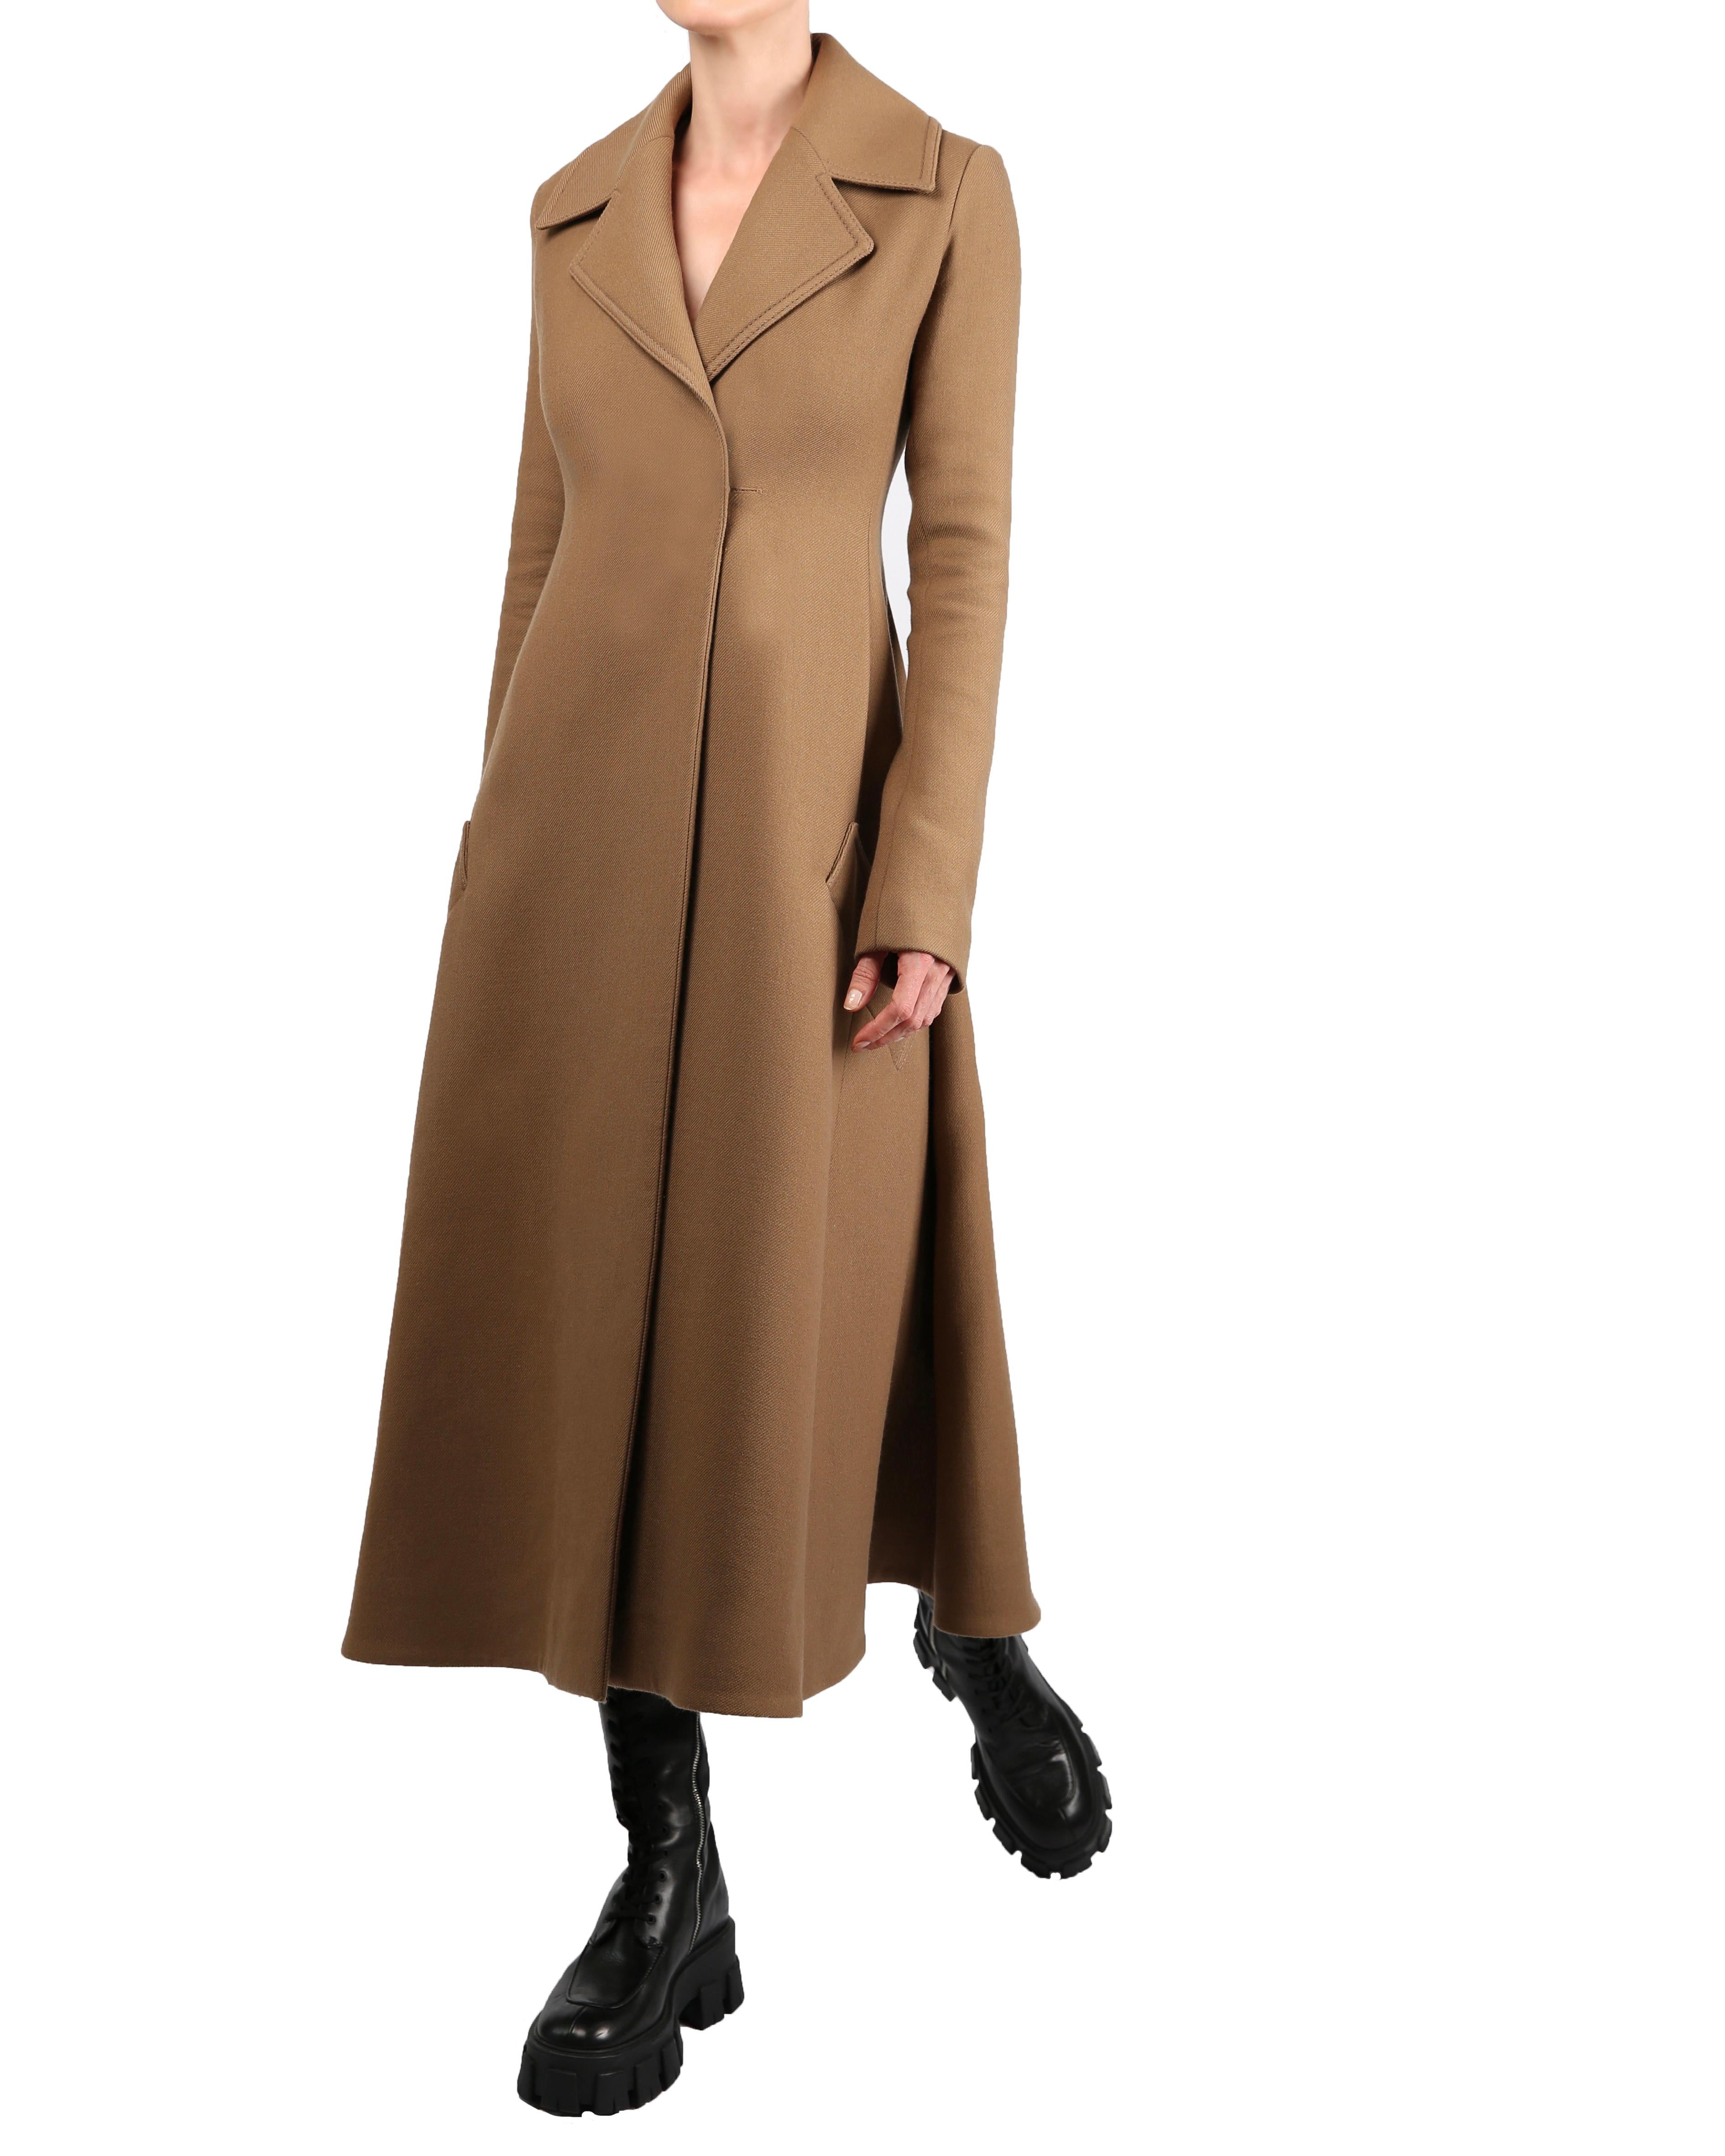 Celine Fall 2014 Phoebe Philo gabardine wool fit and flare maxi coat in  camel at 1stDibs